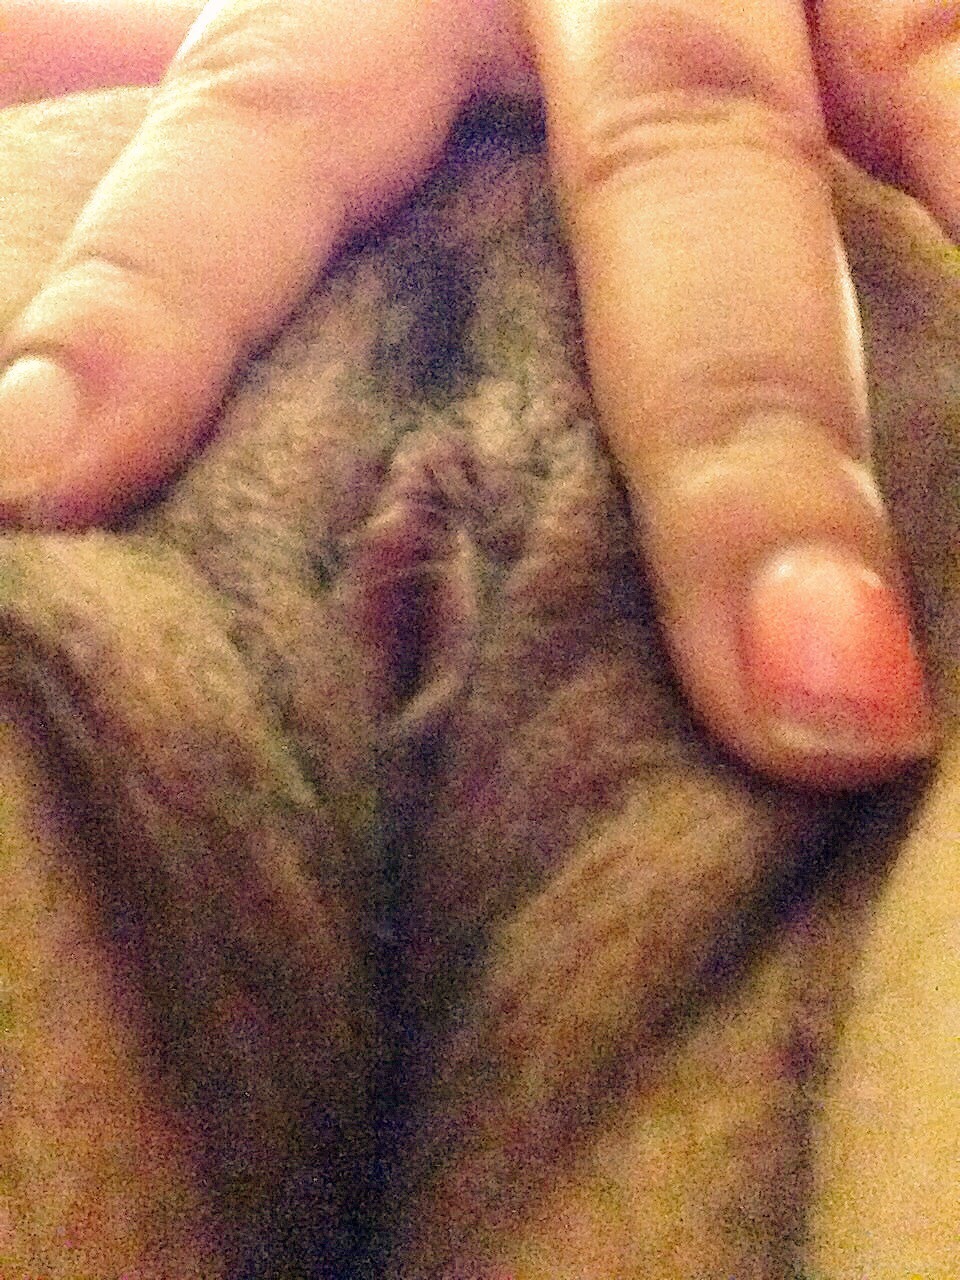 Wife texted me this pic of her pussy up close today at work!&ndash;Thank you